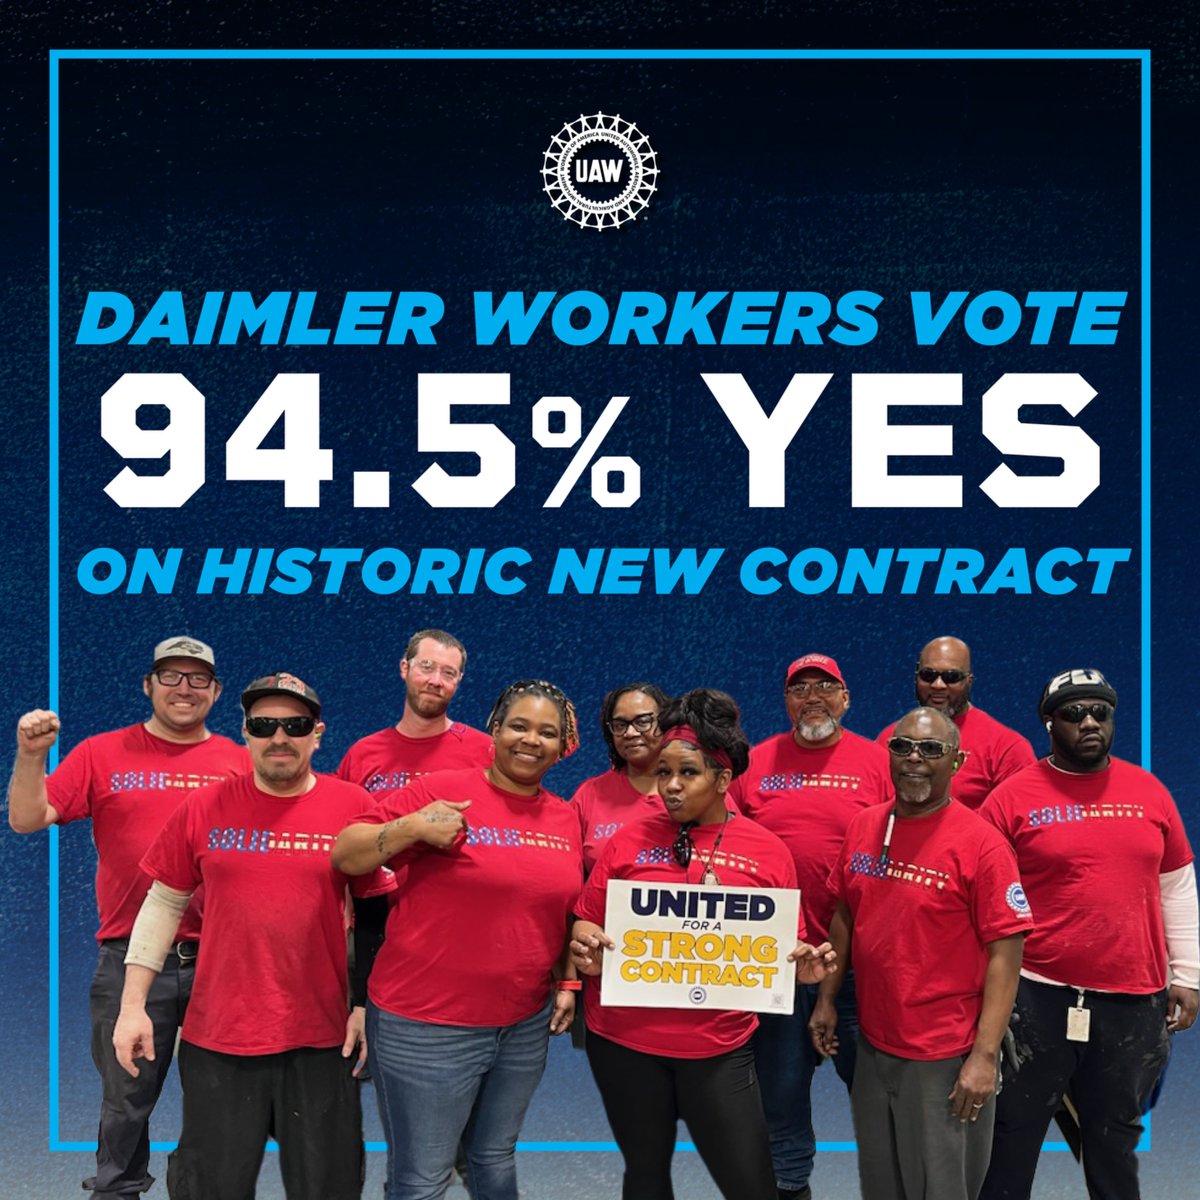 UAW Daimler Truck members turned out in record numbers to ratify a historic common contract by 94.5%! We showed the world what's possible when you Stand Up and Stand United. 
#StandUpDaimler #StandUpUAW